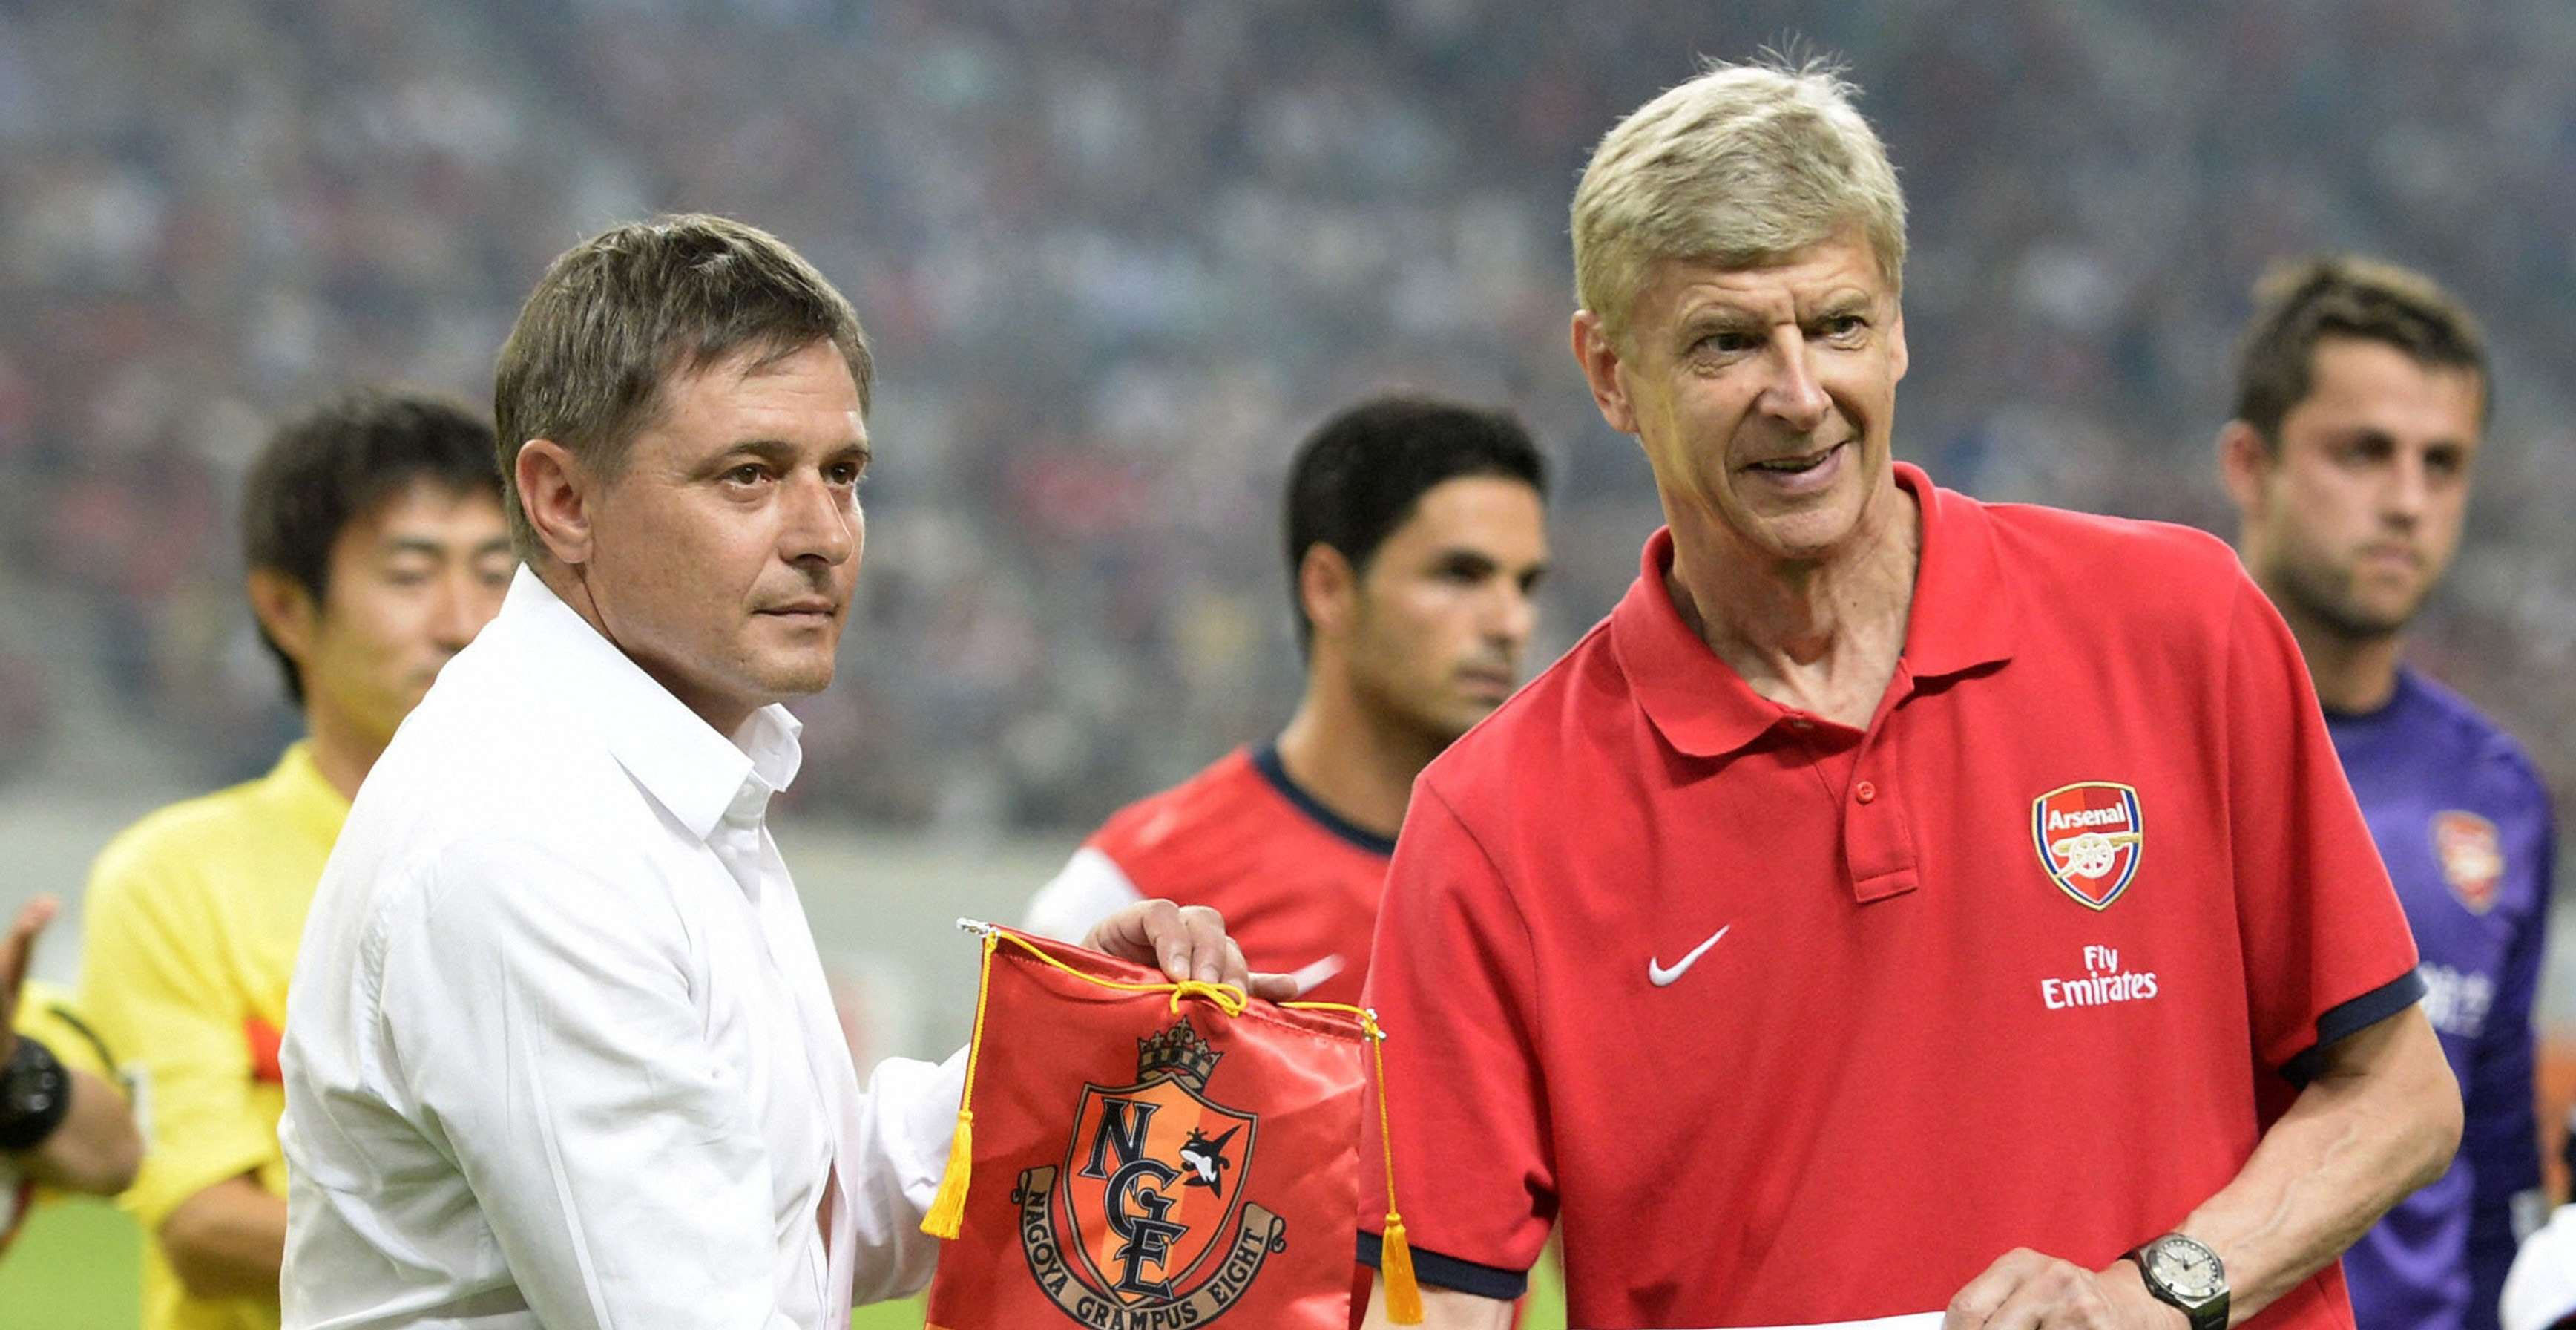 Arsenal's head coach Arsene Wenger (right) shakes hands with Nagoya Grampus manager Dragan Stojkovic before their friendly soccer match as part of Arsenal's Asia Tour 2013 in Toyota, central Japan. Photo: Reuters